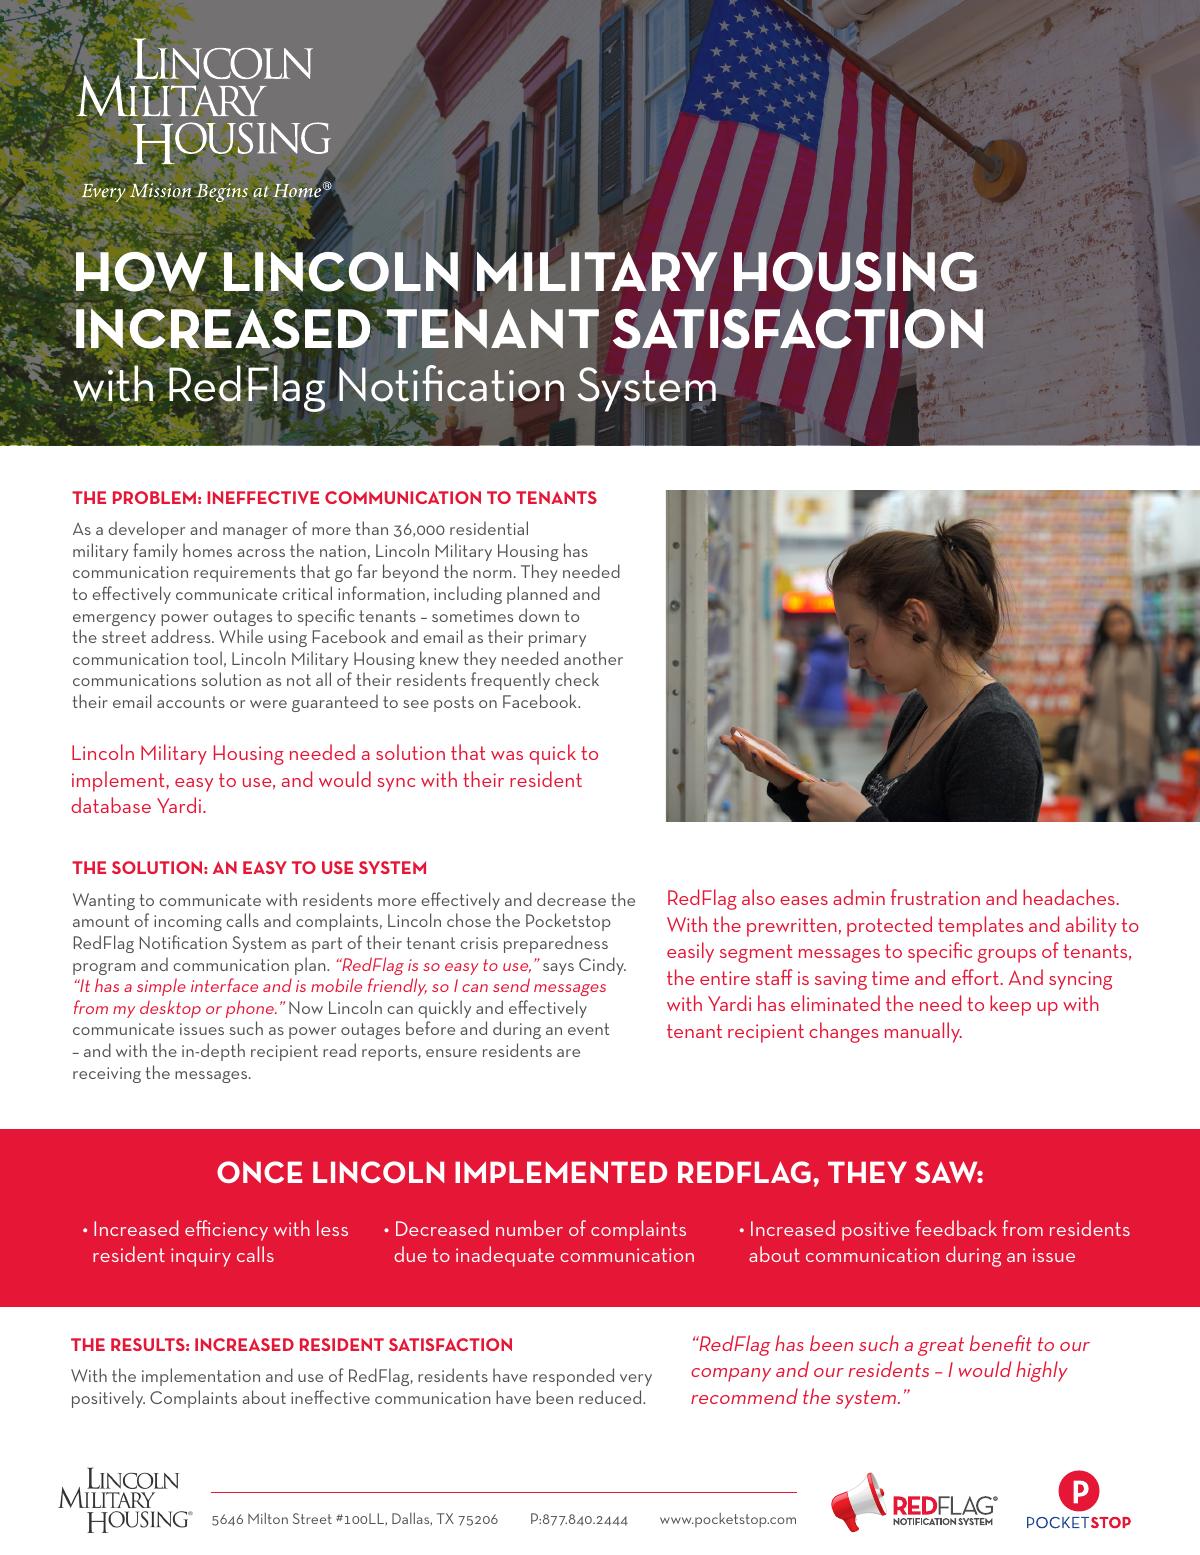 RedFlag Case Study: Lincoln Military Housing